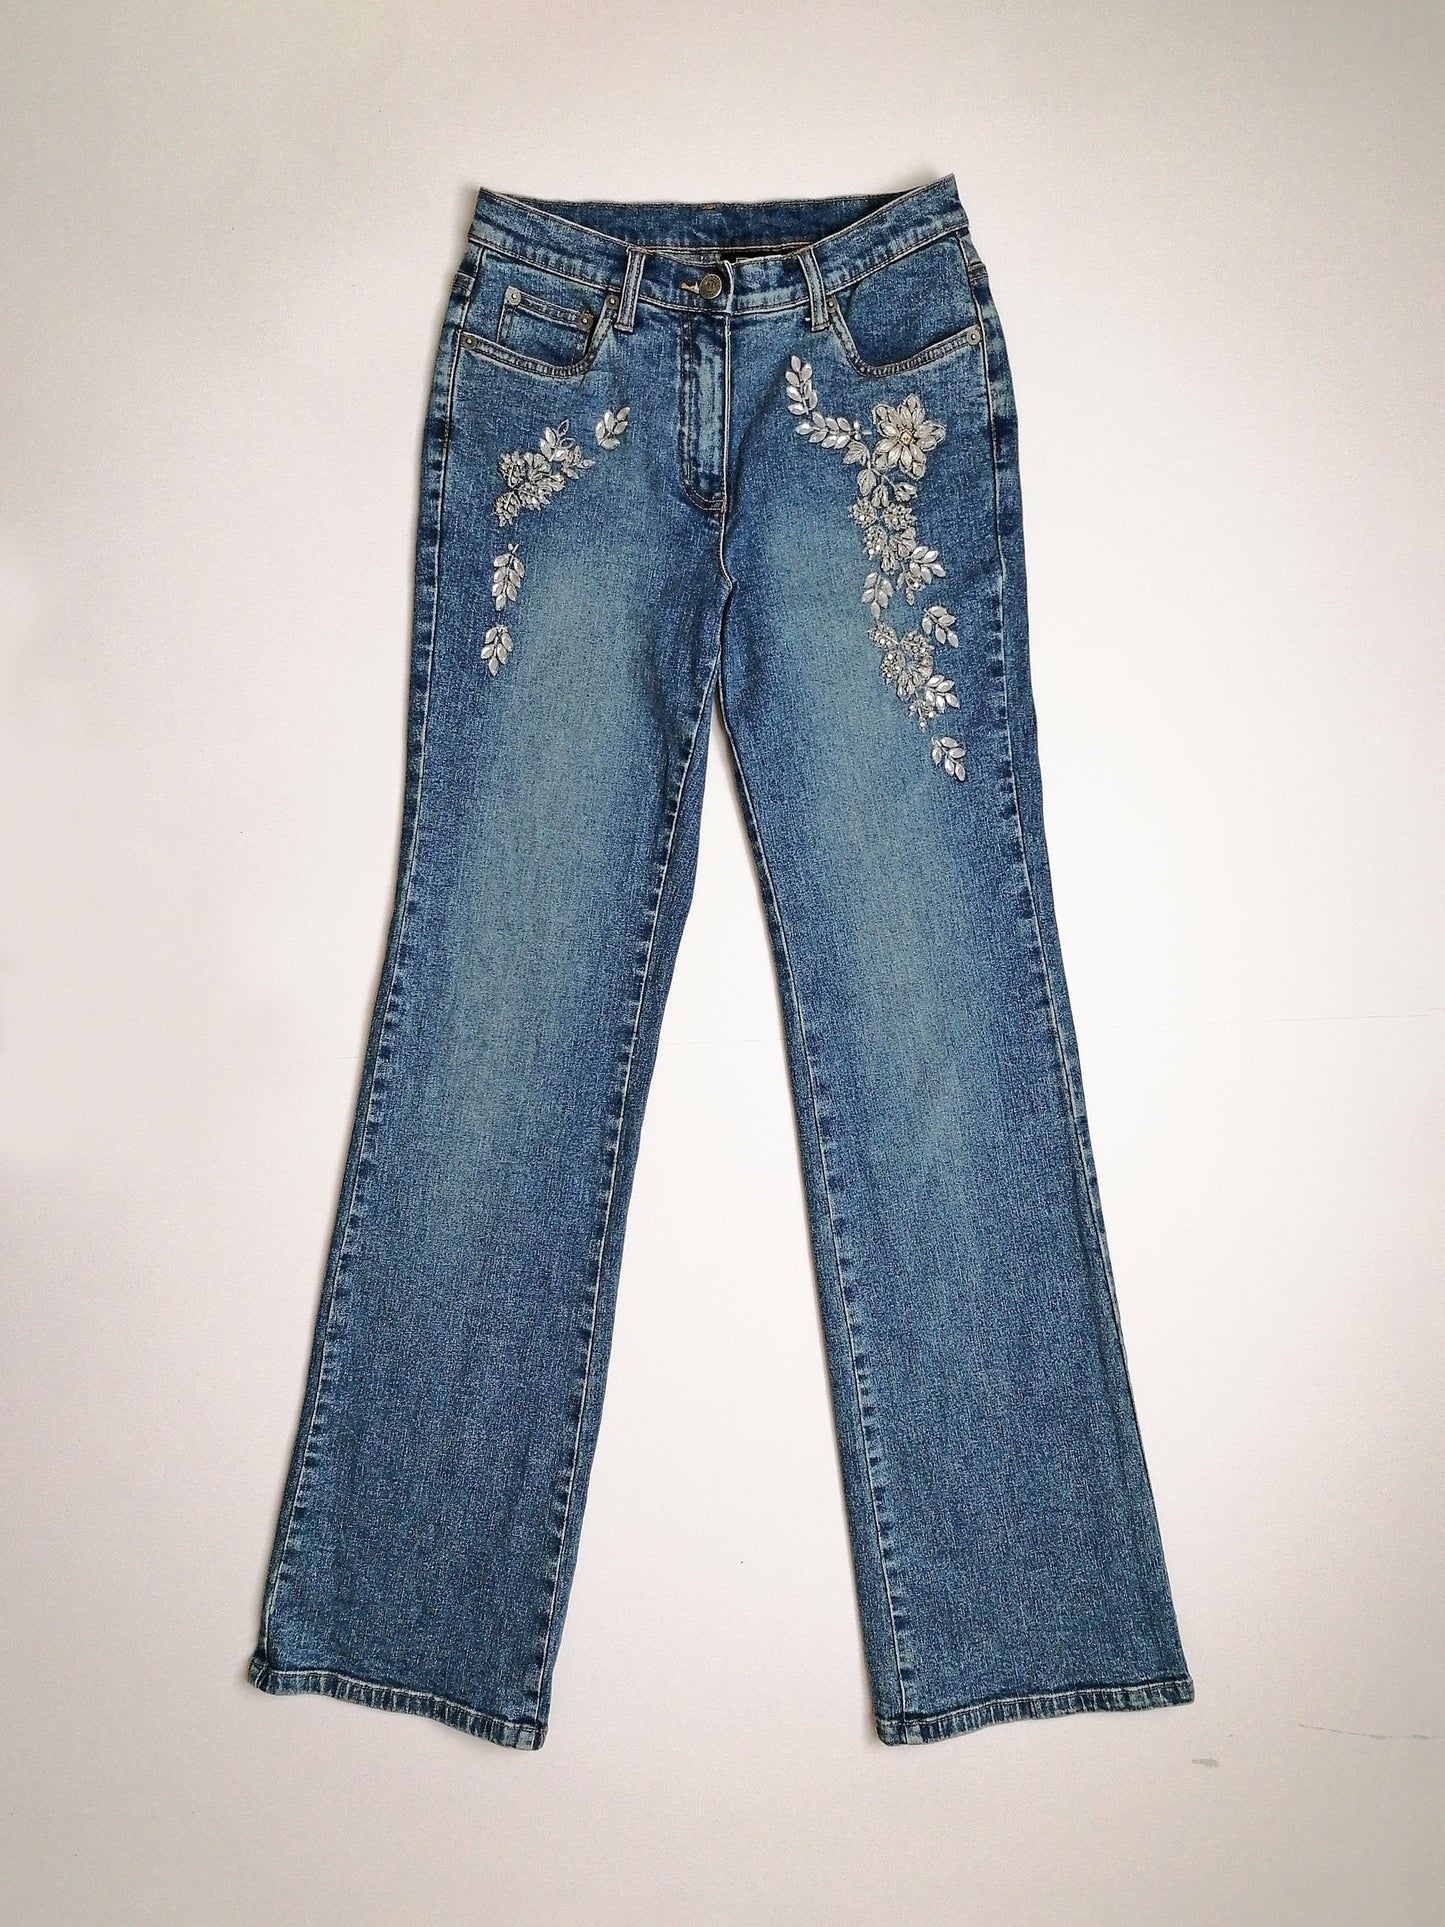 Y2K MADELEINE Embroidery Jeans - size M - 36/UK 10